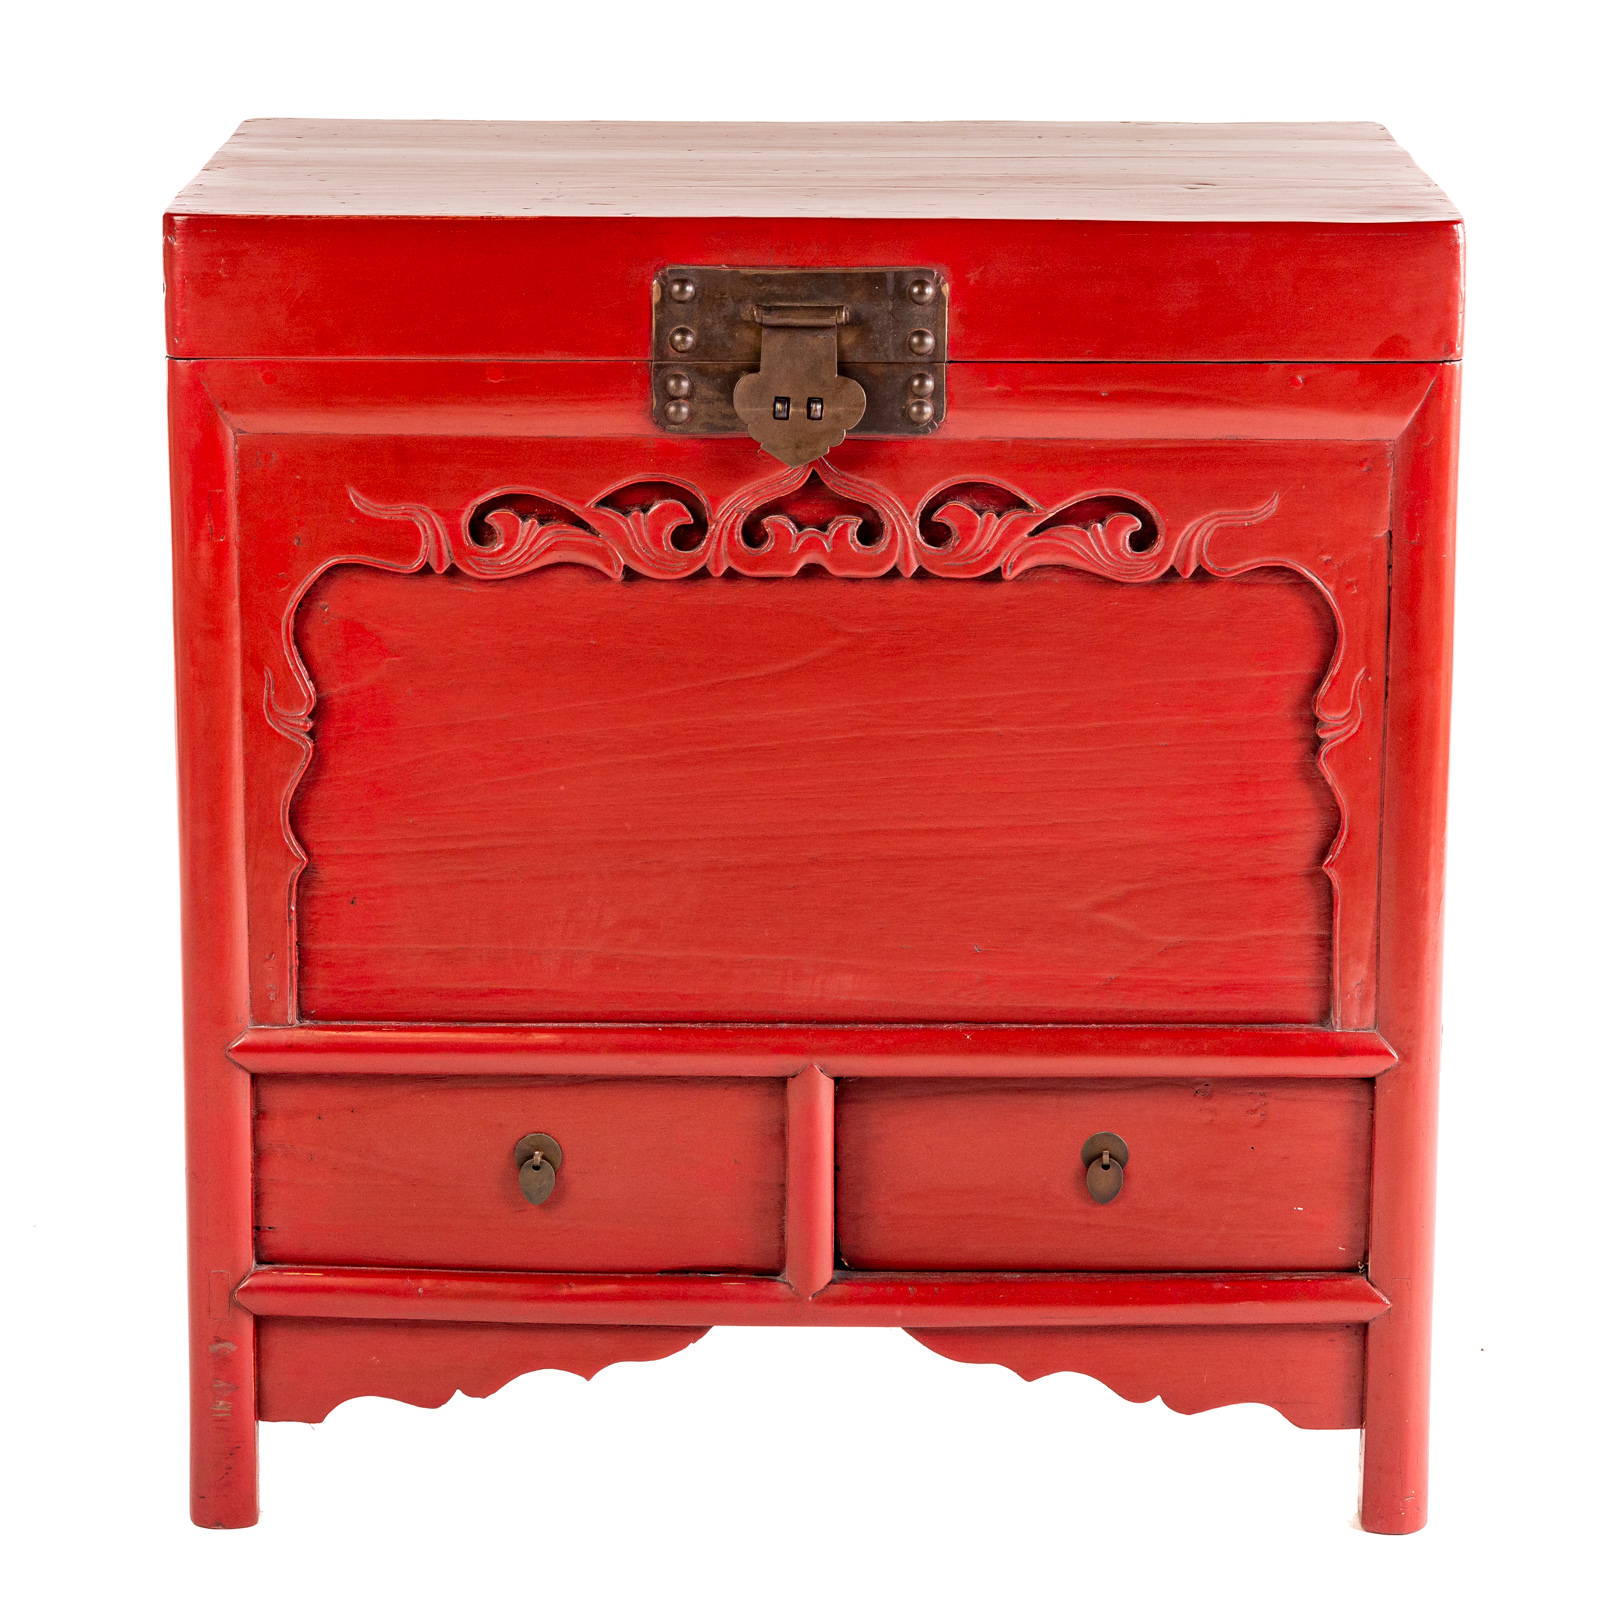 CHINESE LACQUER WOOD GARMENT CHEST